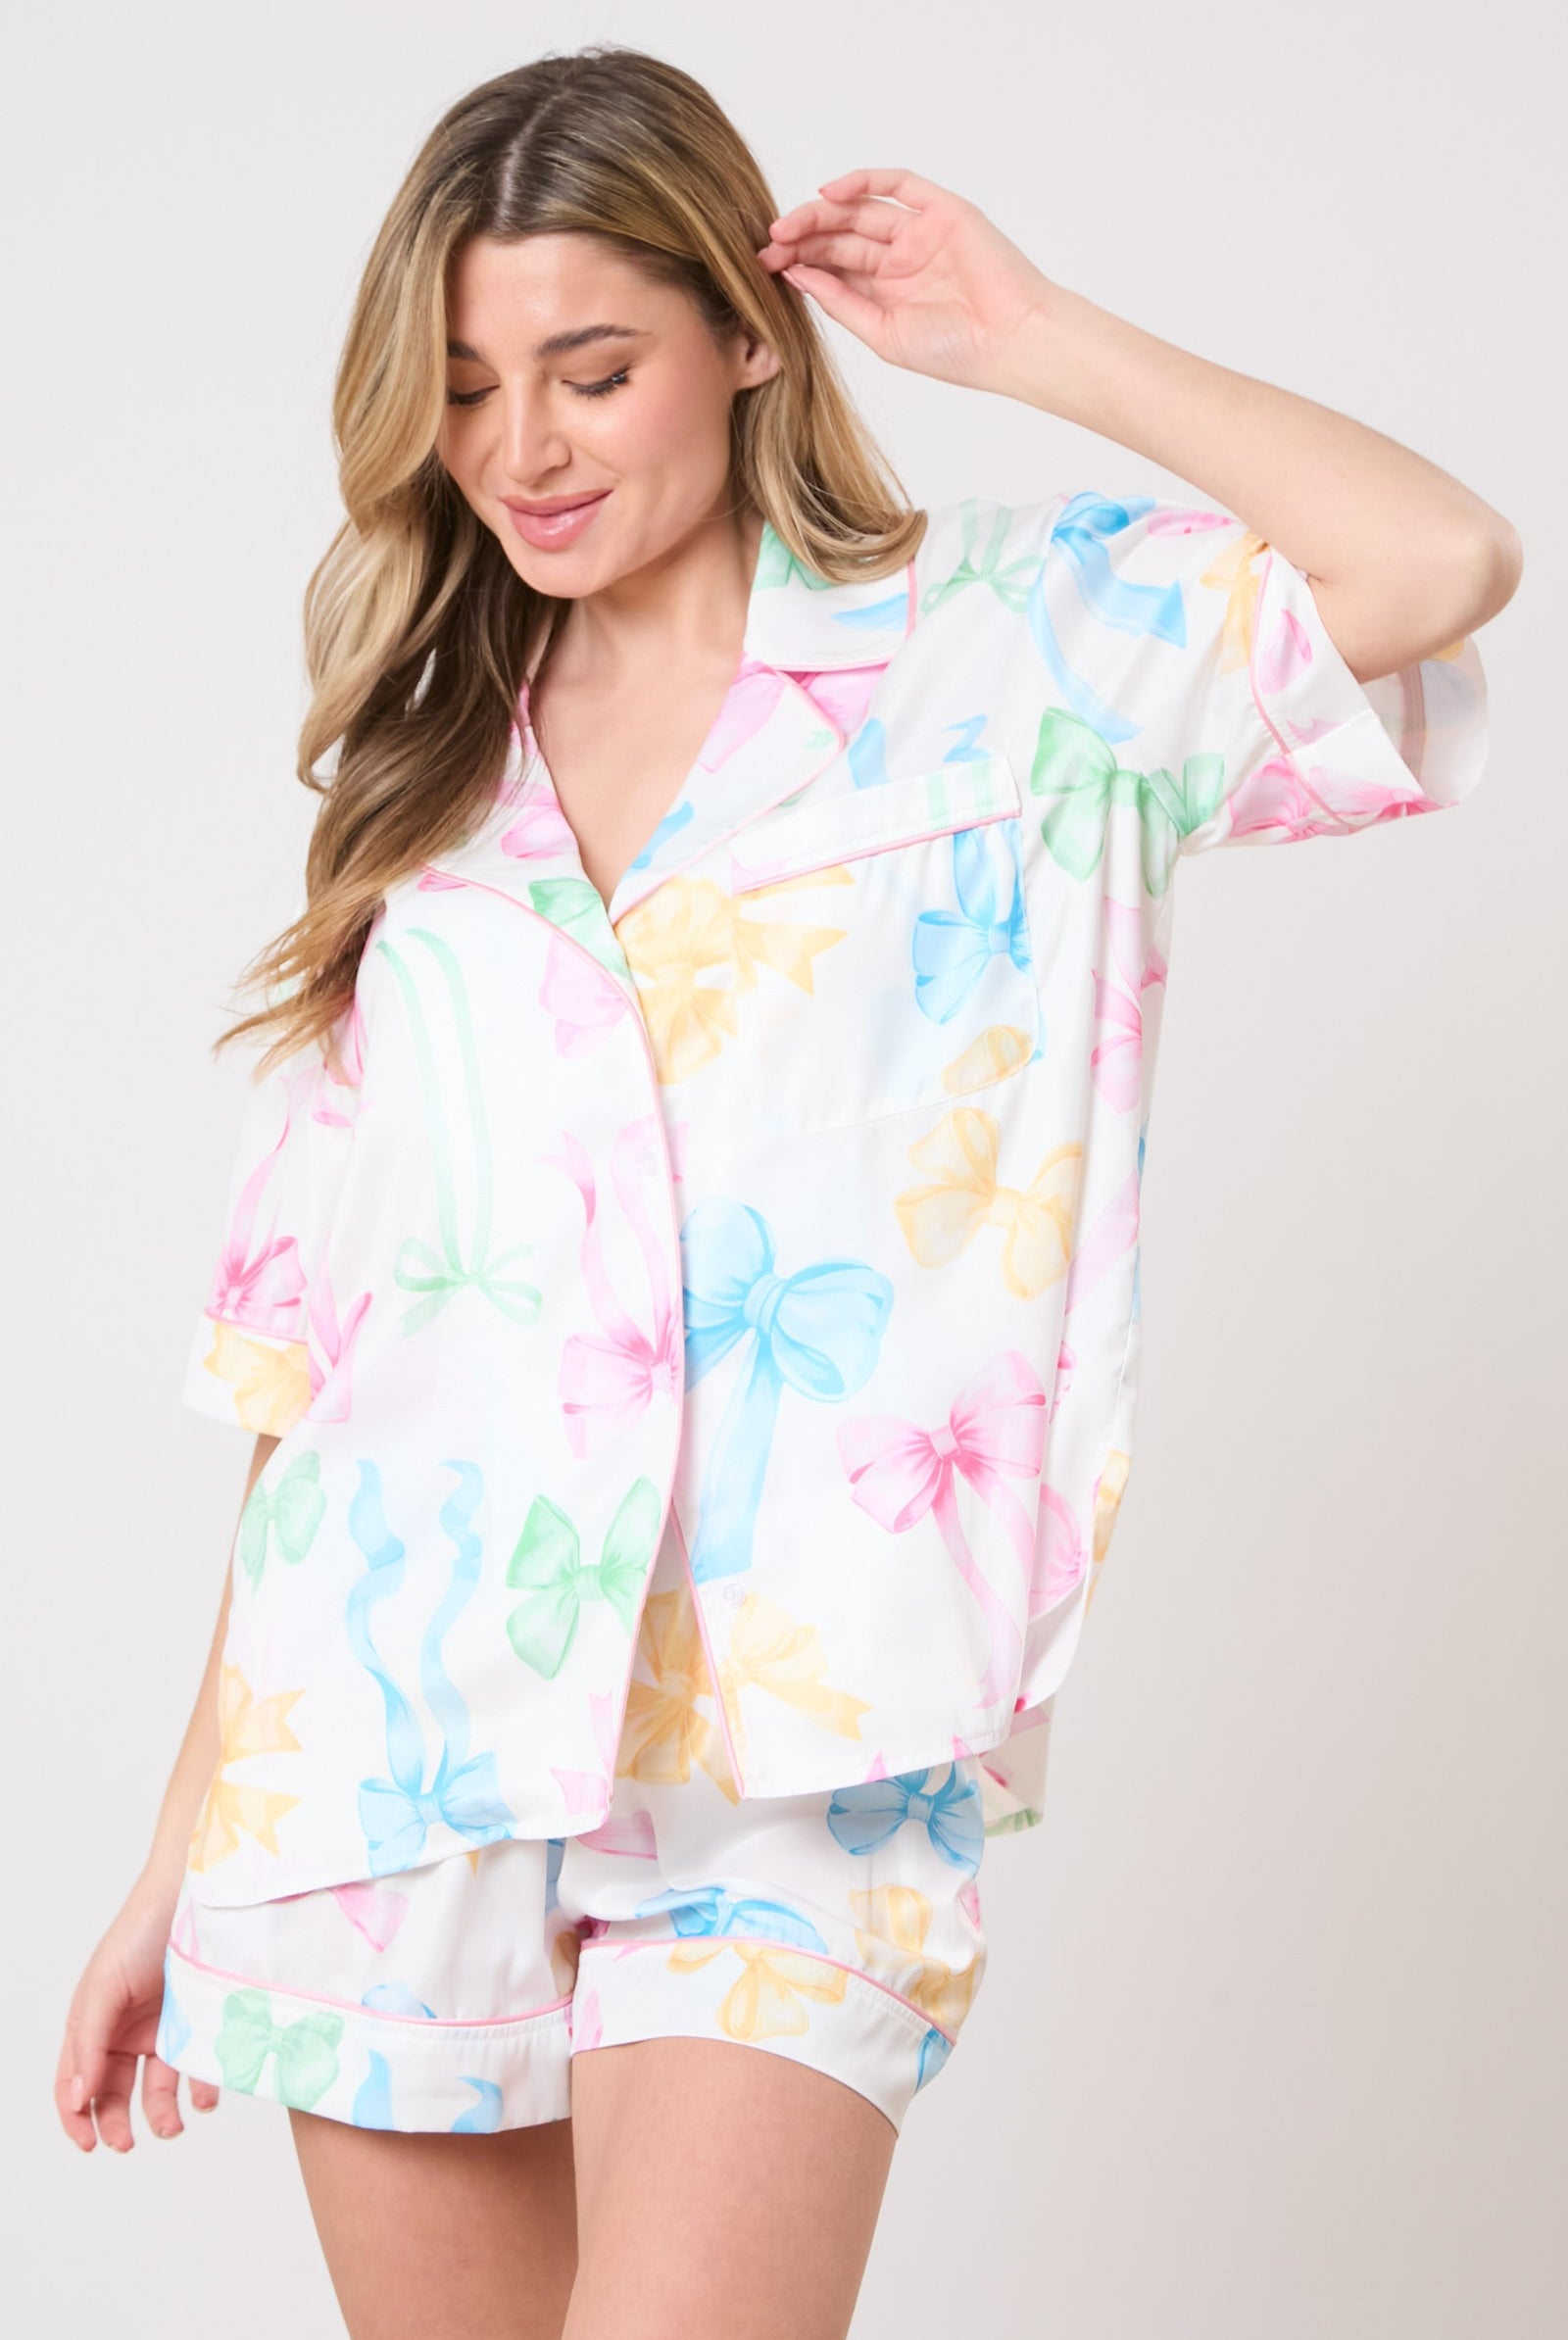 Sweet Ribbon Print Satin Multi Color Pajama Top and Bottom Set - Be You Boutique